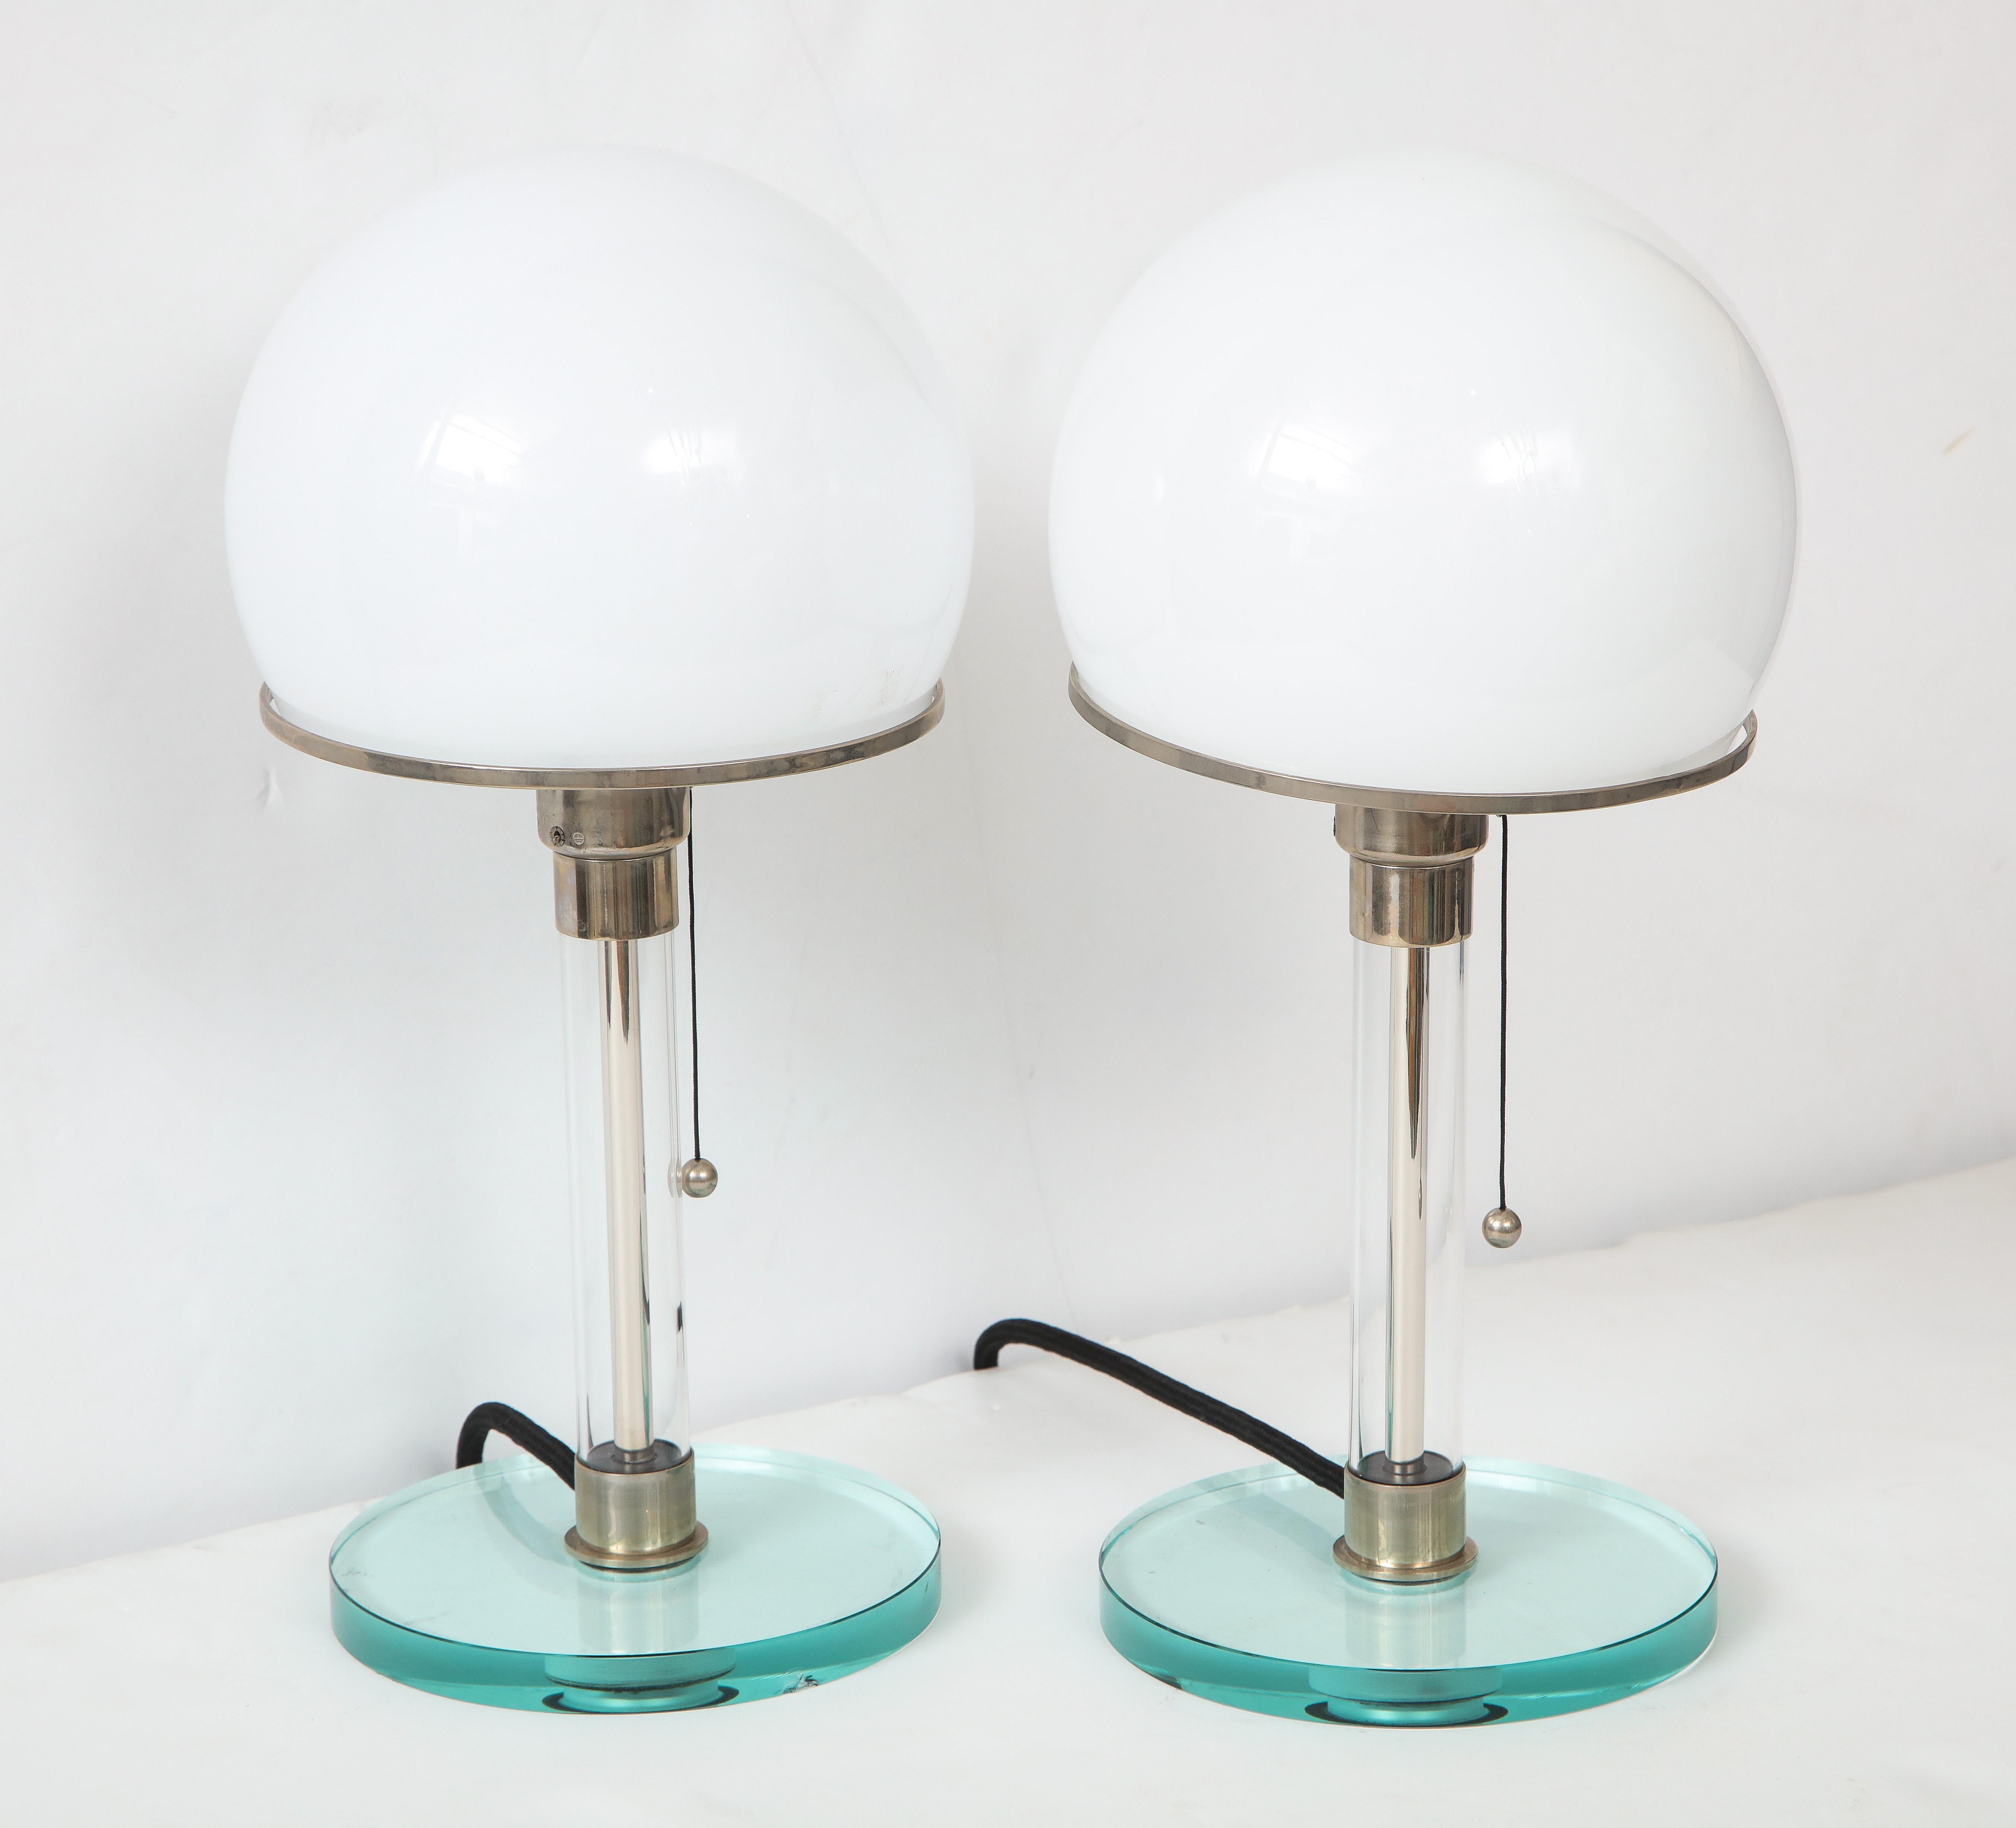 Glass Pair of Table Lamps after the Design by Wilhelm Wagenfeld